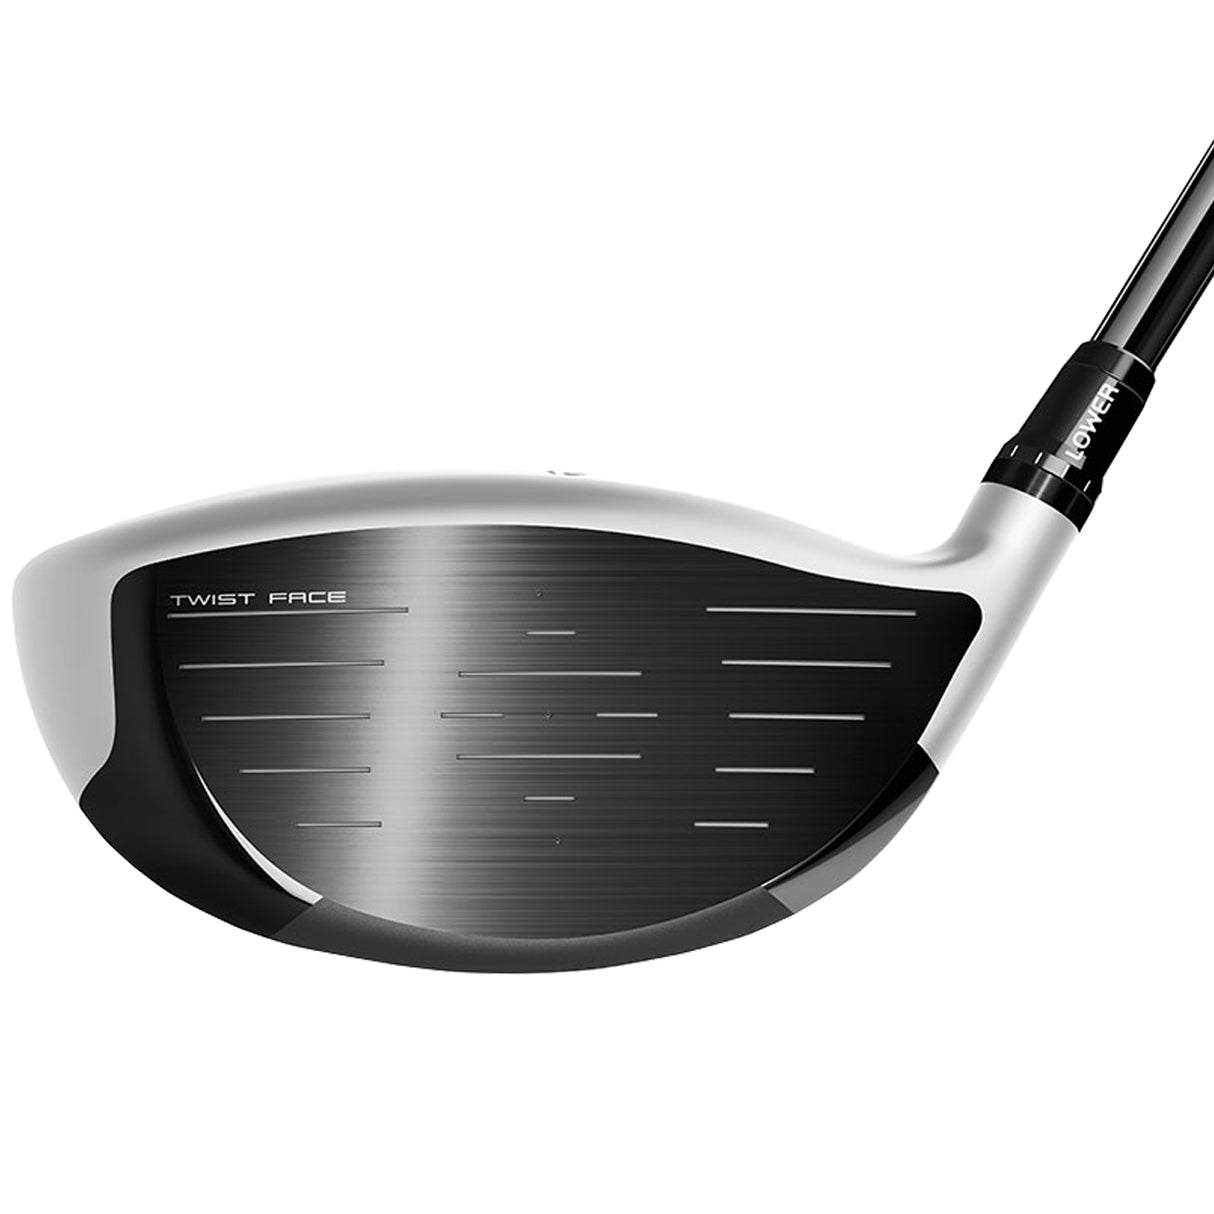 TaylorMade Golf M4 460cc Adjustable Driver, Open Box